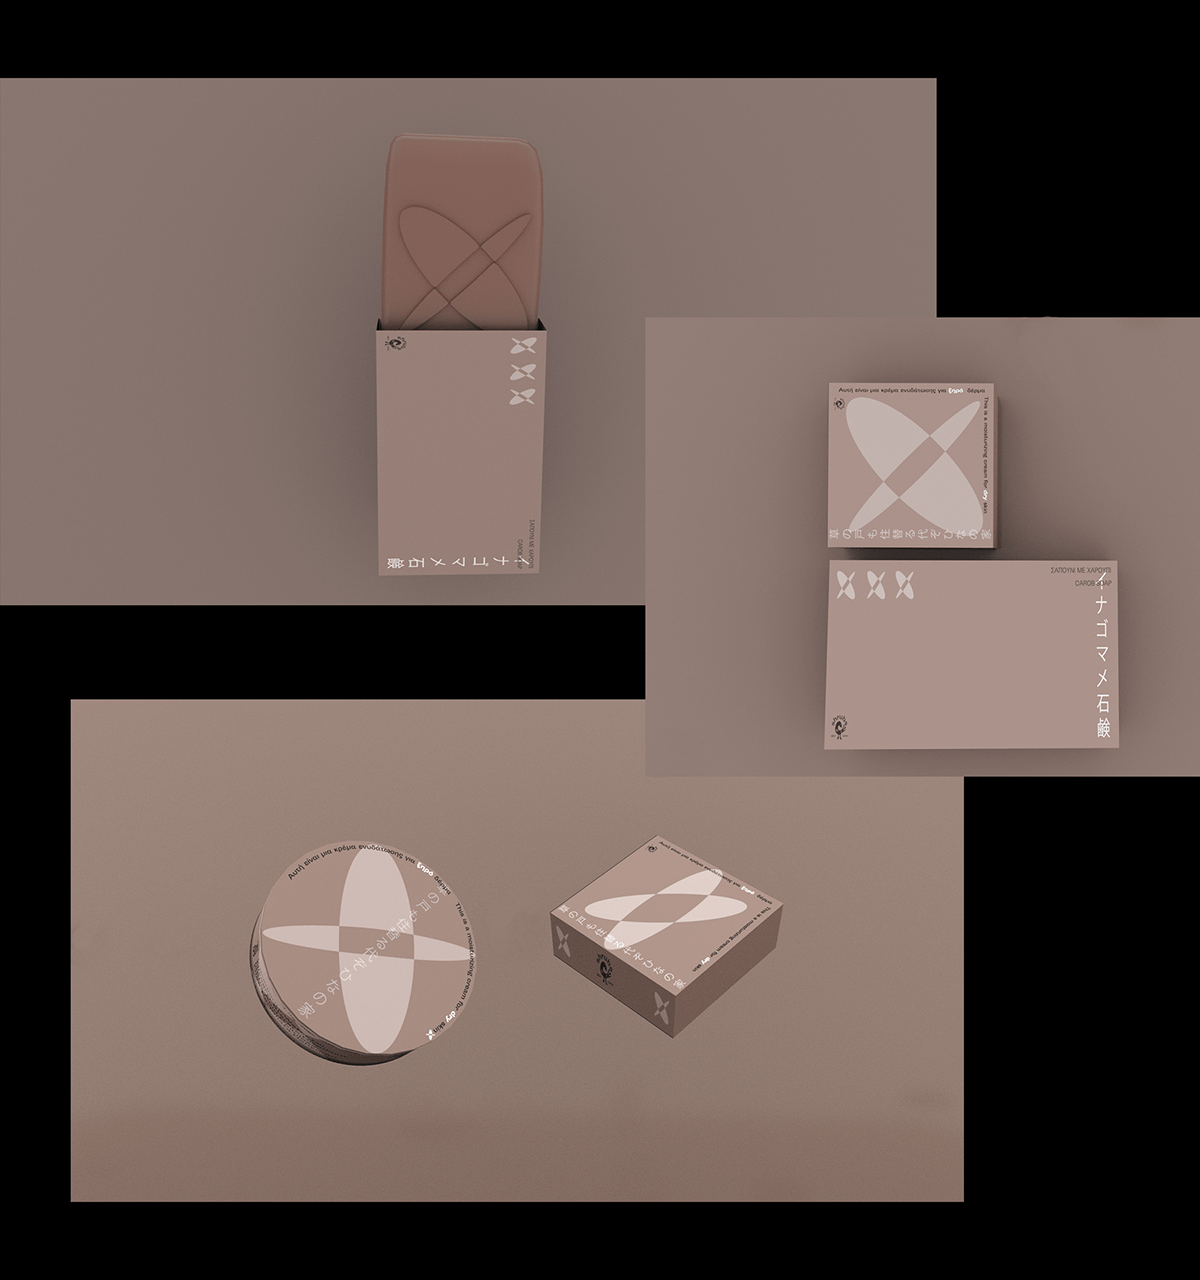 #3dmodeling #Branding #Design #graphicDesign #packaging #typogrpahy